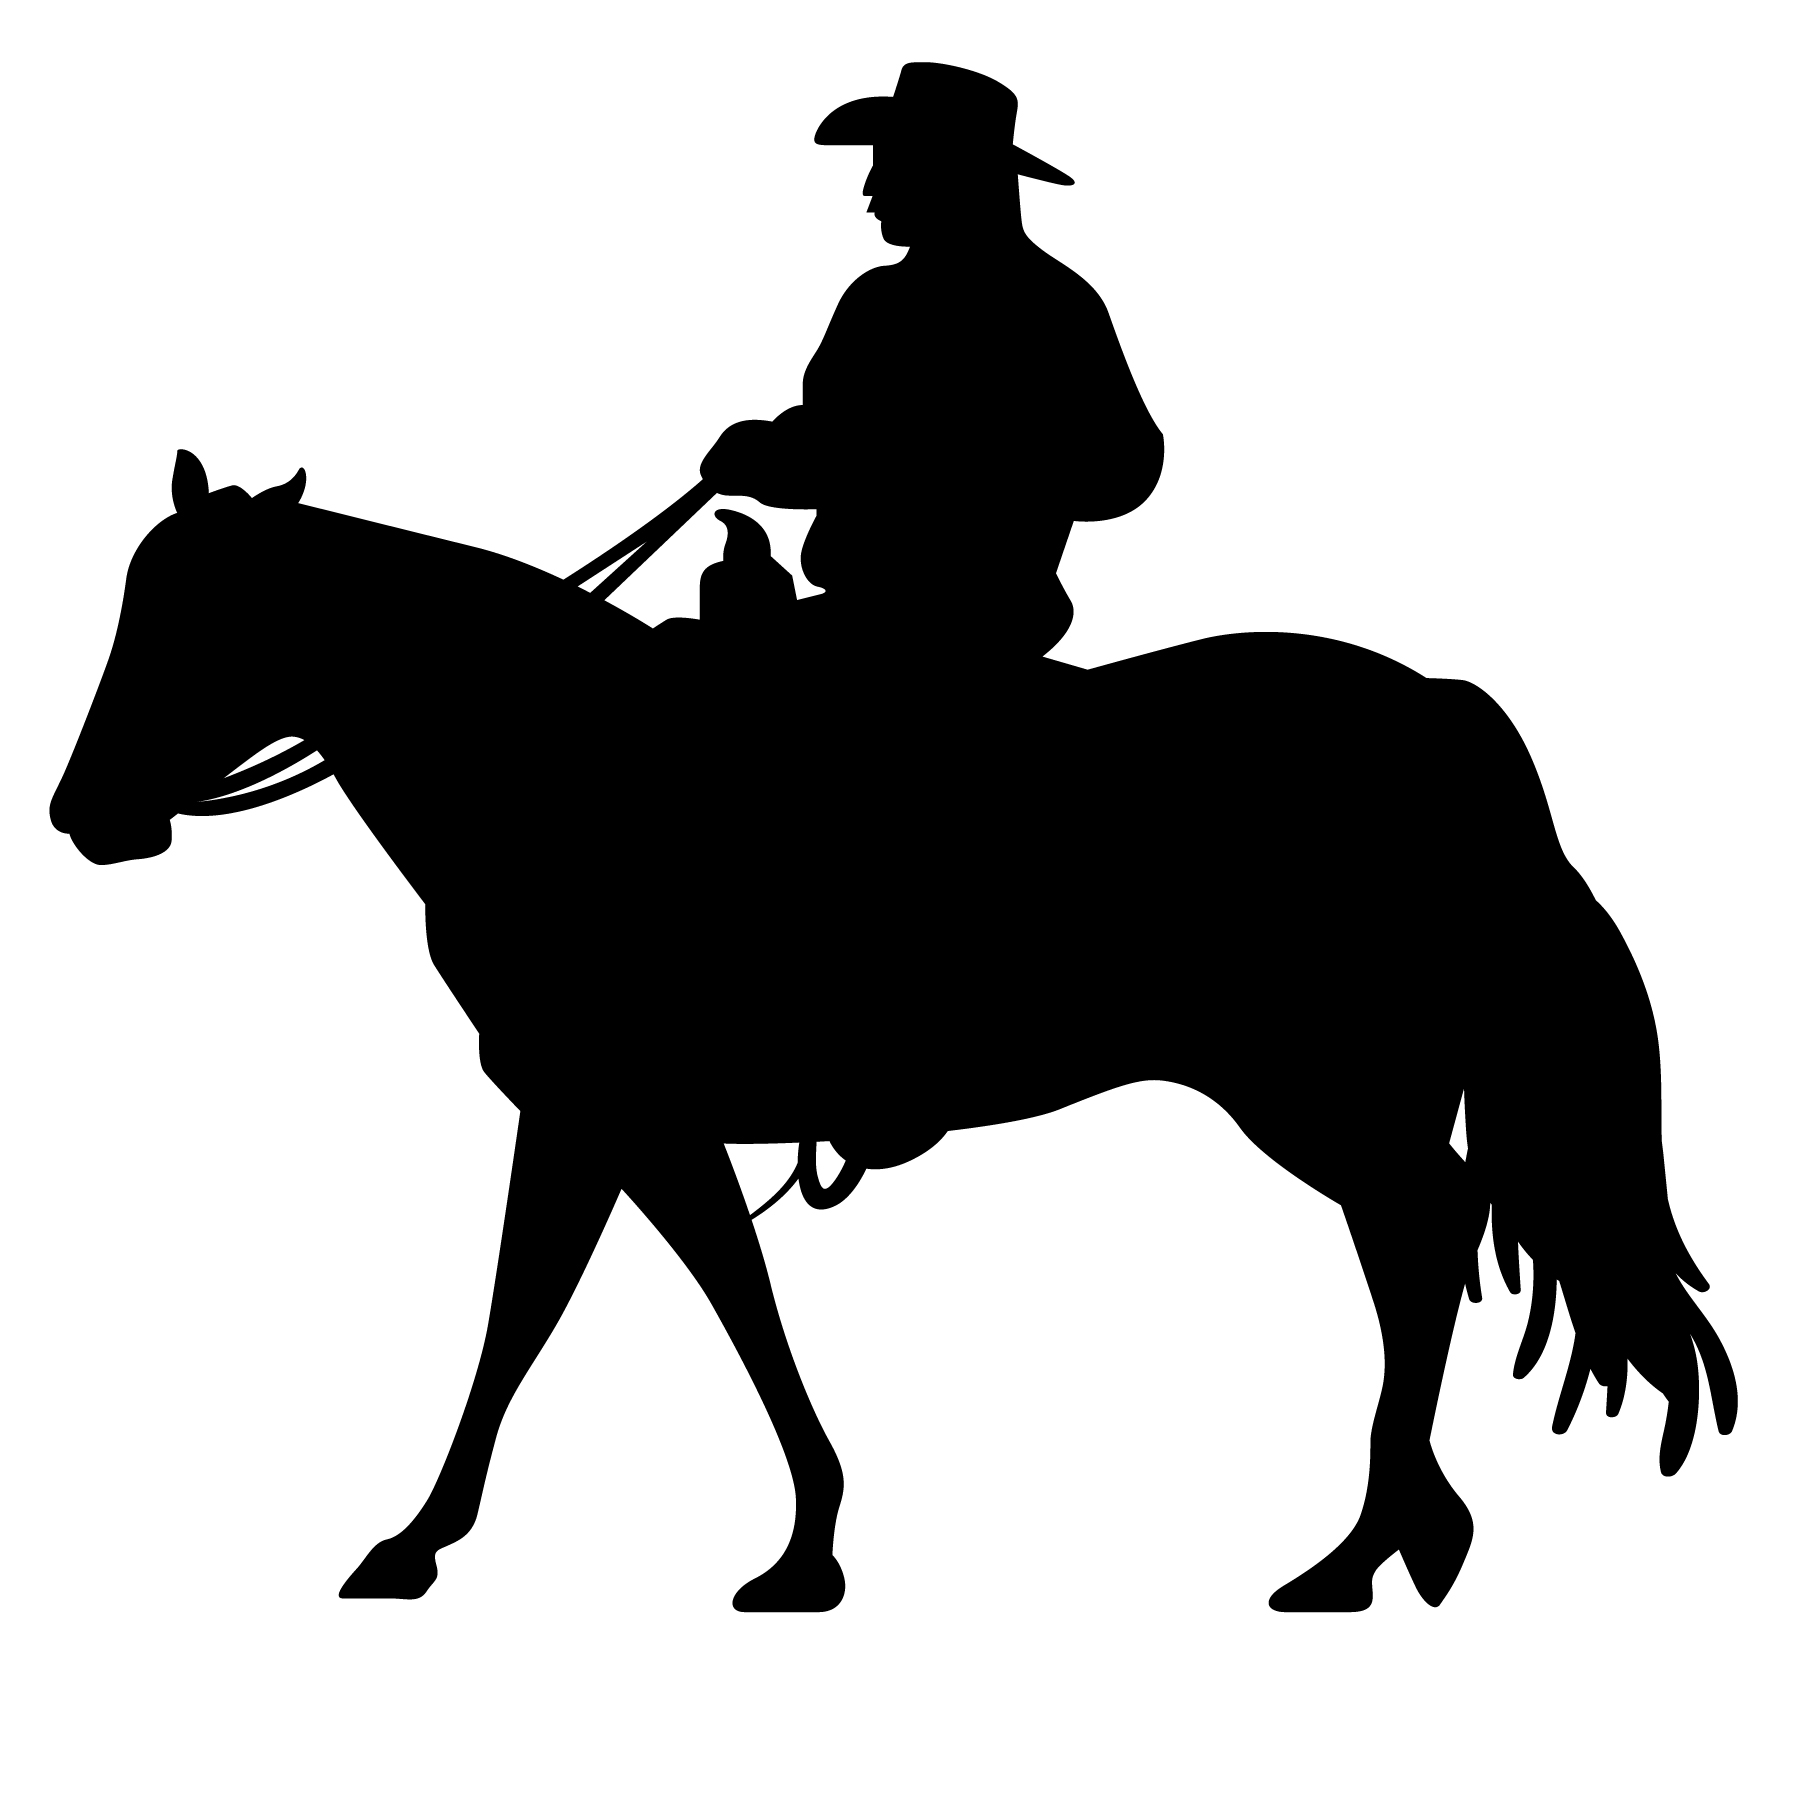 Download riding a horse silhouette - Download Free Vectors, Clipart ...